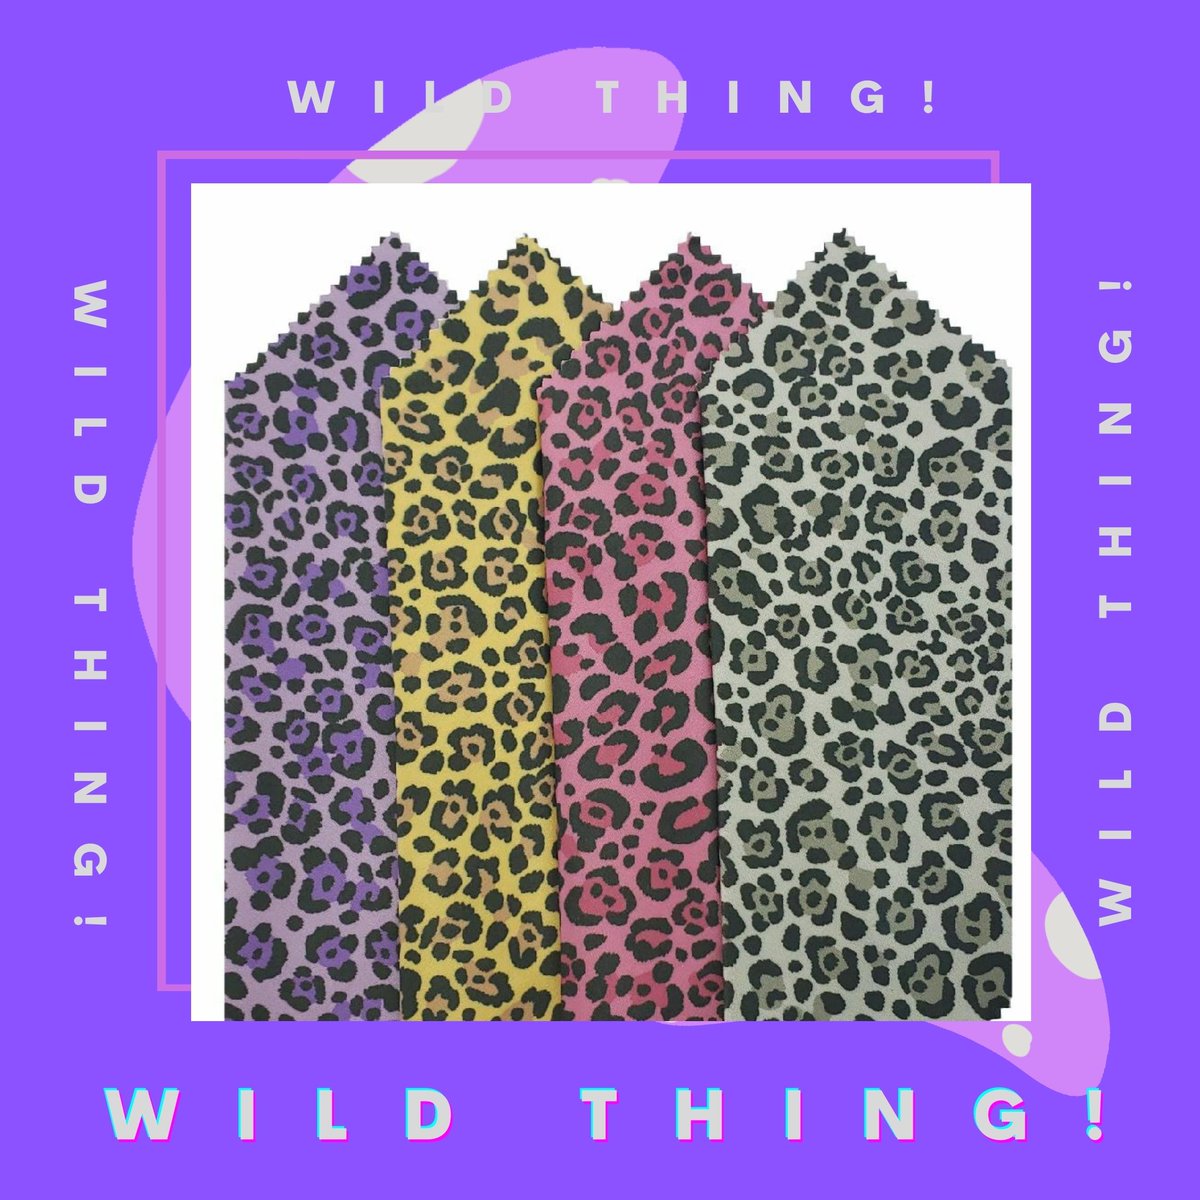 With fashion trending our favorites from the 80s & 90s we thought you might dig these new prints! Totally Rad & Wild thing printed cloths. Visit caloptix.com or call 800.523.5567 #caloptix #optical #opticalaccessories #cleaneyewear